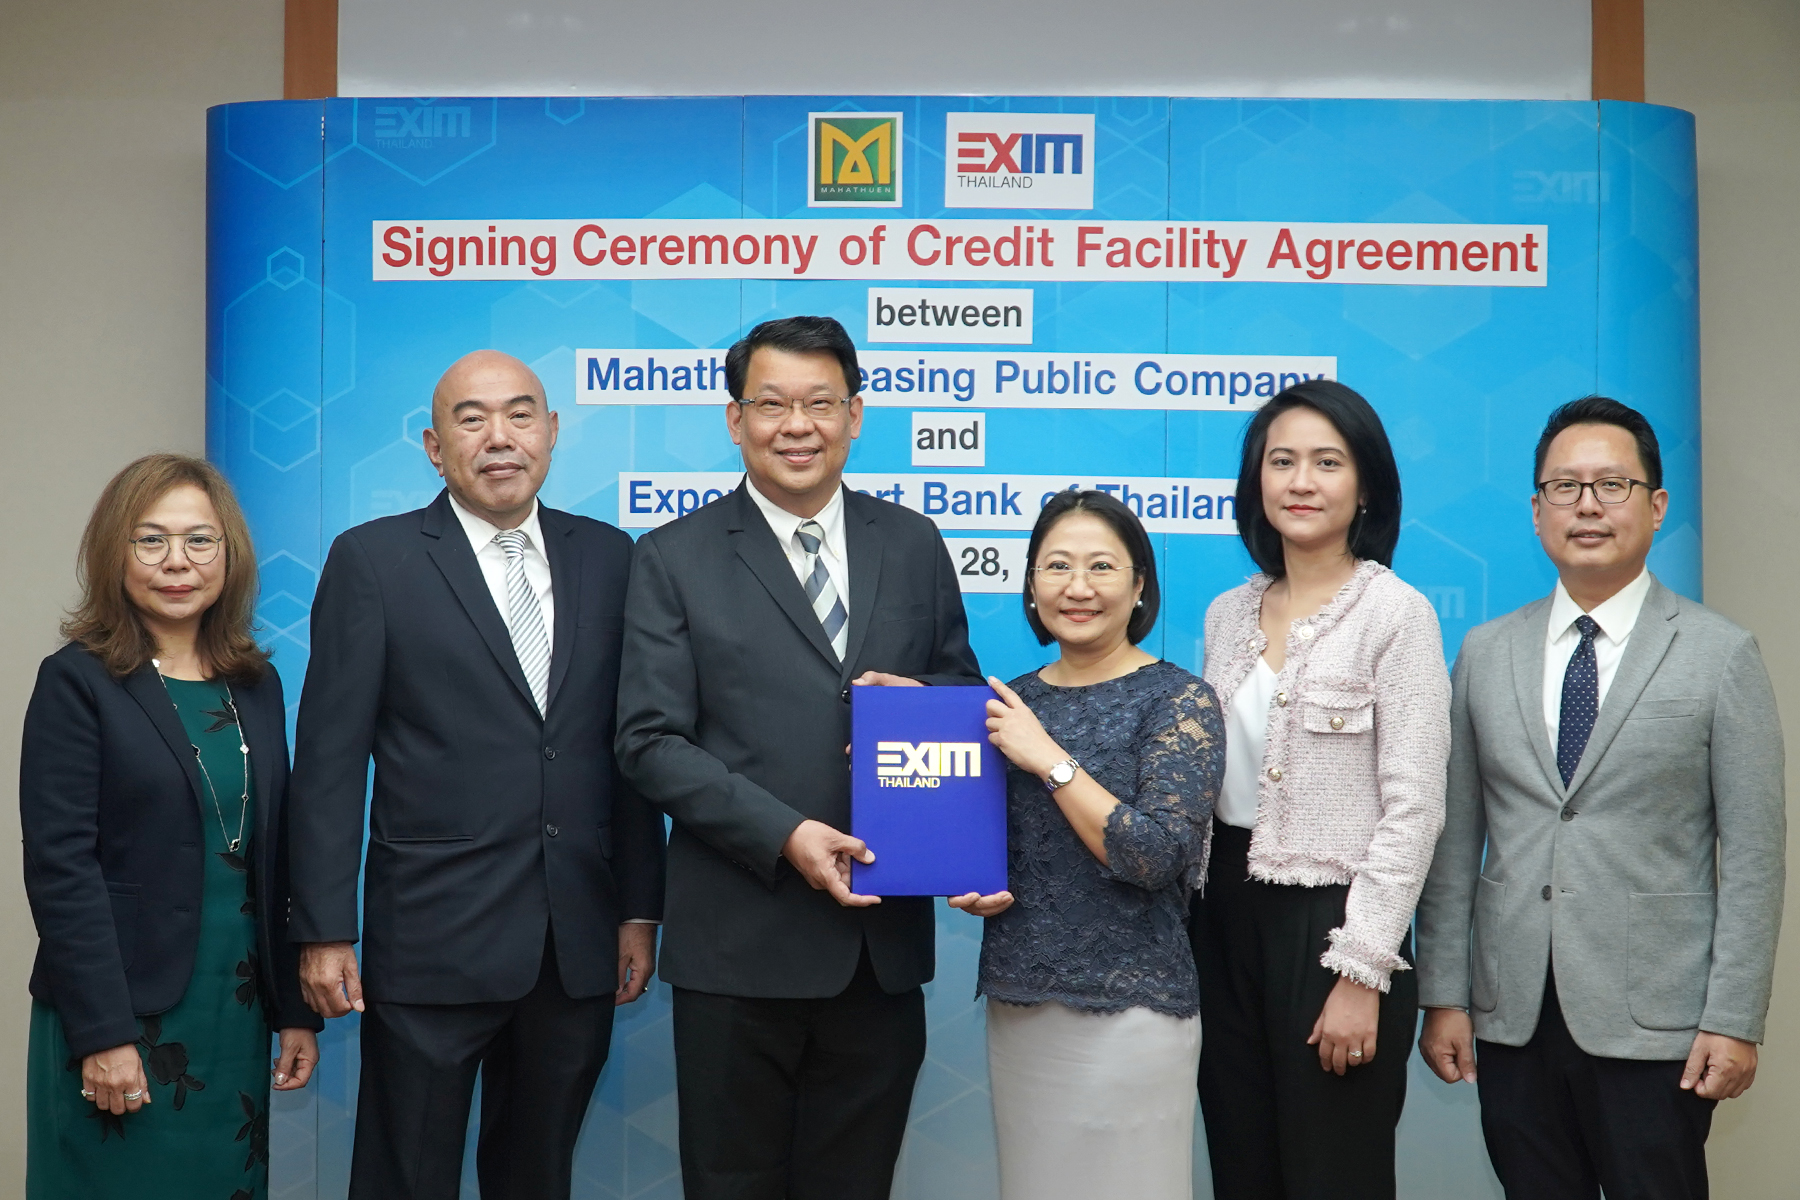 EXIM Thailand Finances Mahathuen Leasing Public Company’s Expansion  in Response to Growth of Motorcycle Leasing Business in Lao PDR